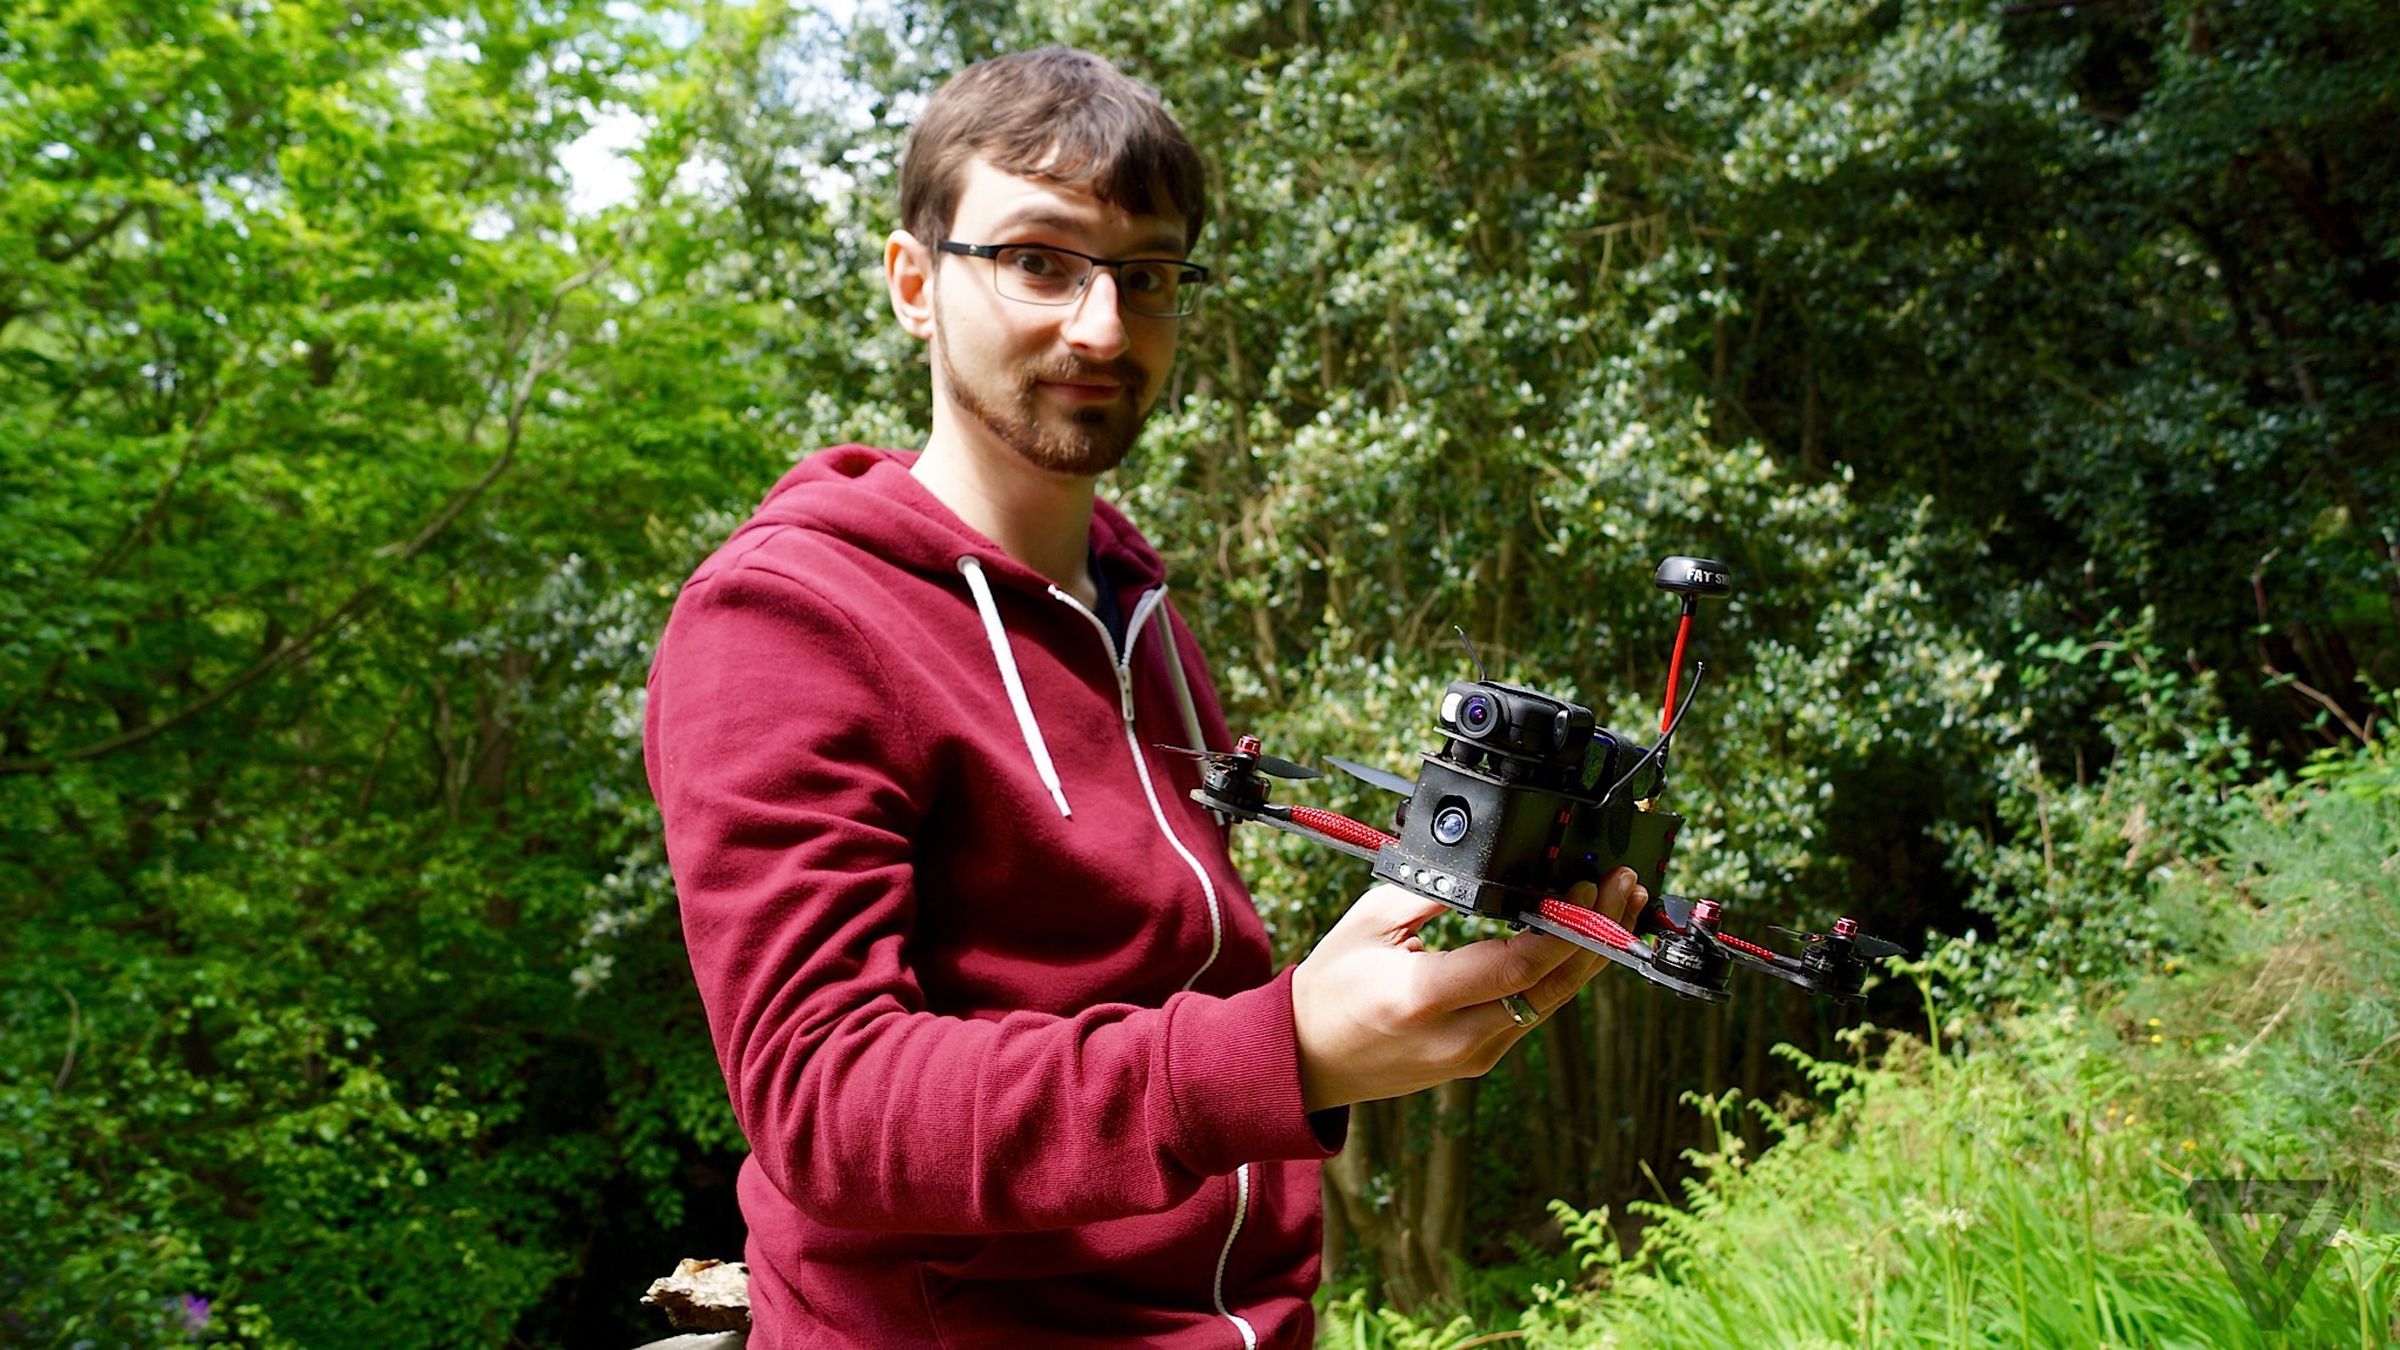 Racing drones in the forests of East Grinstead